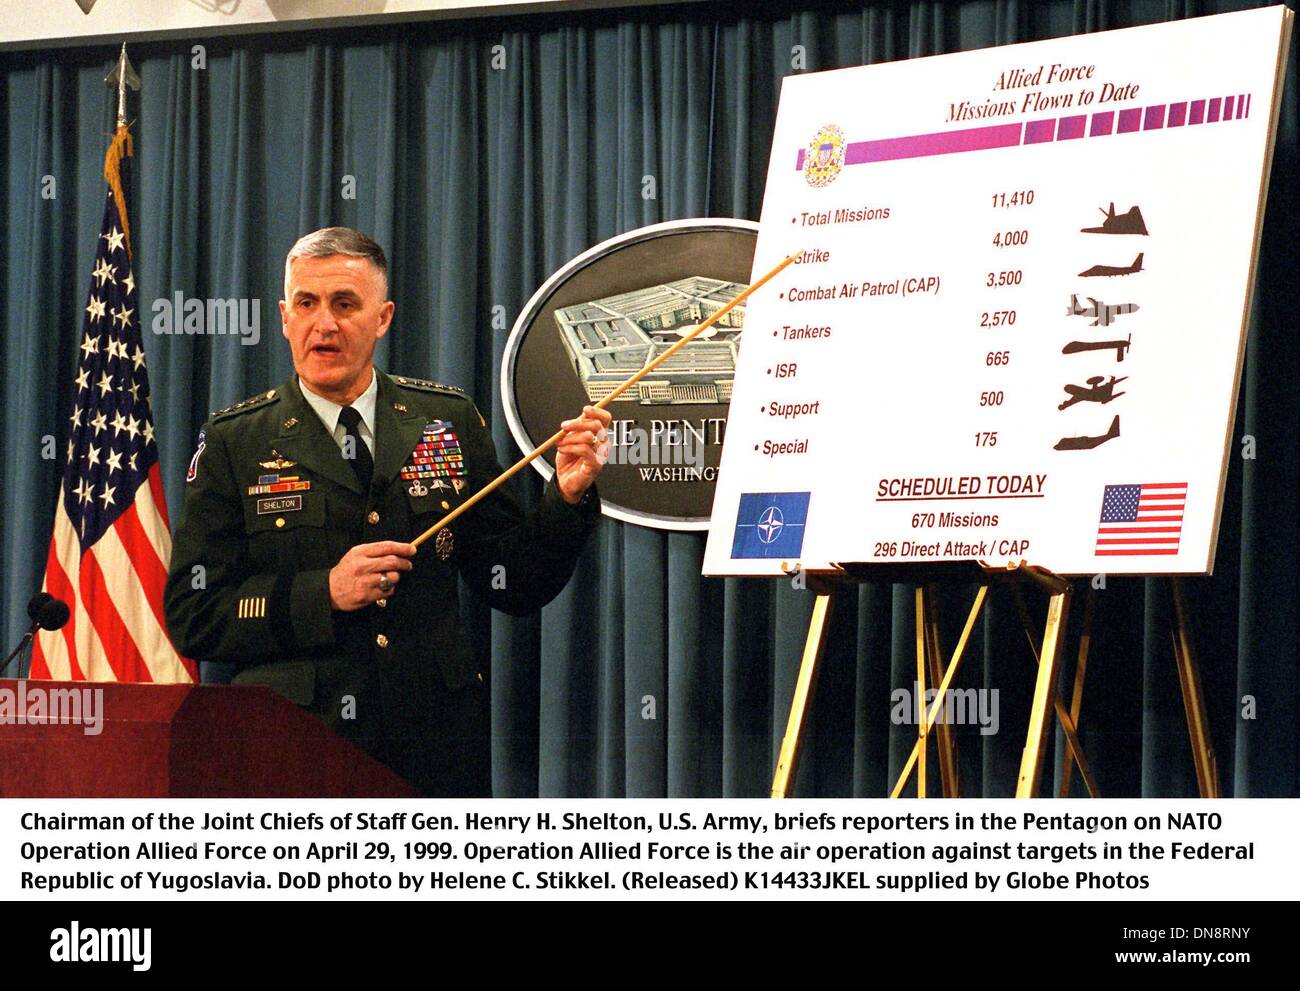 Apr. 29, 1999 - K14433JKEL    04/29/99.990429-D-2789S-024..Chairman of the Joint Chiefs of Staff Gen. Henry H. Shelton, U.S. Army, briefs reporters in the Pentagon on NATO Operation Allied Force on April 29, 1999.  Operation Allied Force is the air operation against targets in the Federal Republic of Yugoslavia.  .DoD  Helene C. Stikkel.  (Released).Supplied by    1999(Credit Image Stock Photo